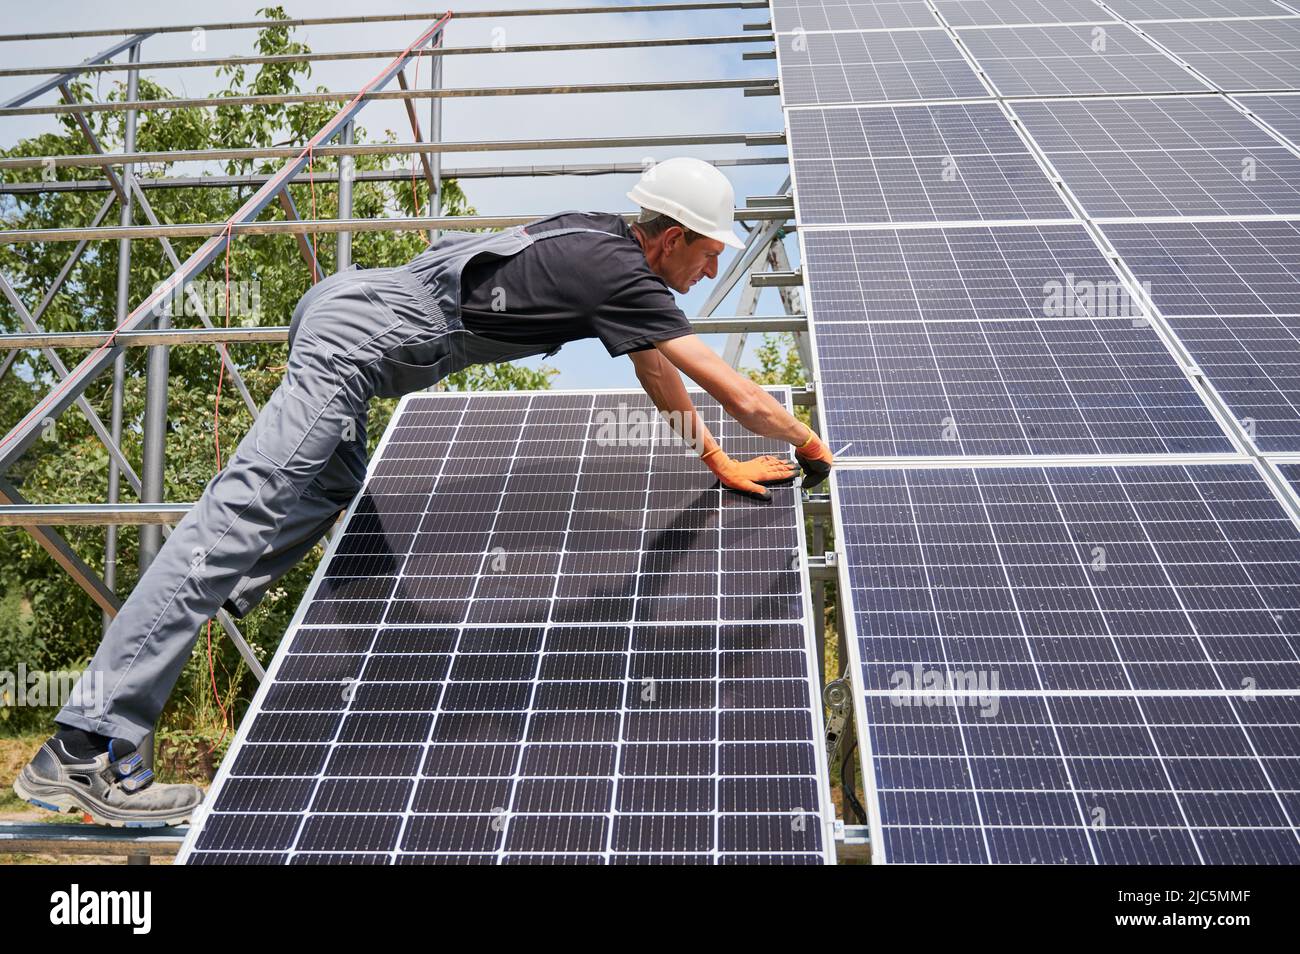 Man engineer solar installer placing solar module on metal rails. Male worker installing photovoltaic solar panel system. Concept of alternative energy and power sustainable resources. Stock Photo